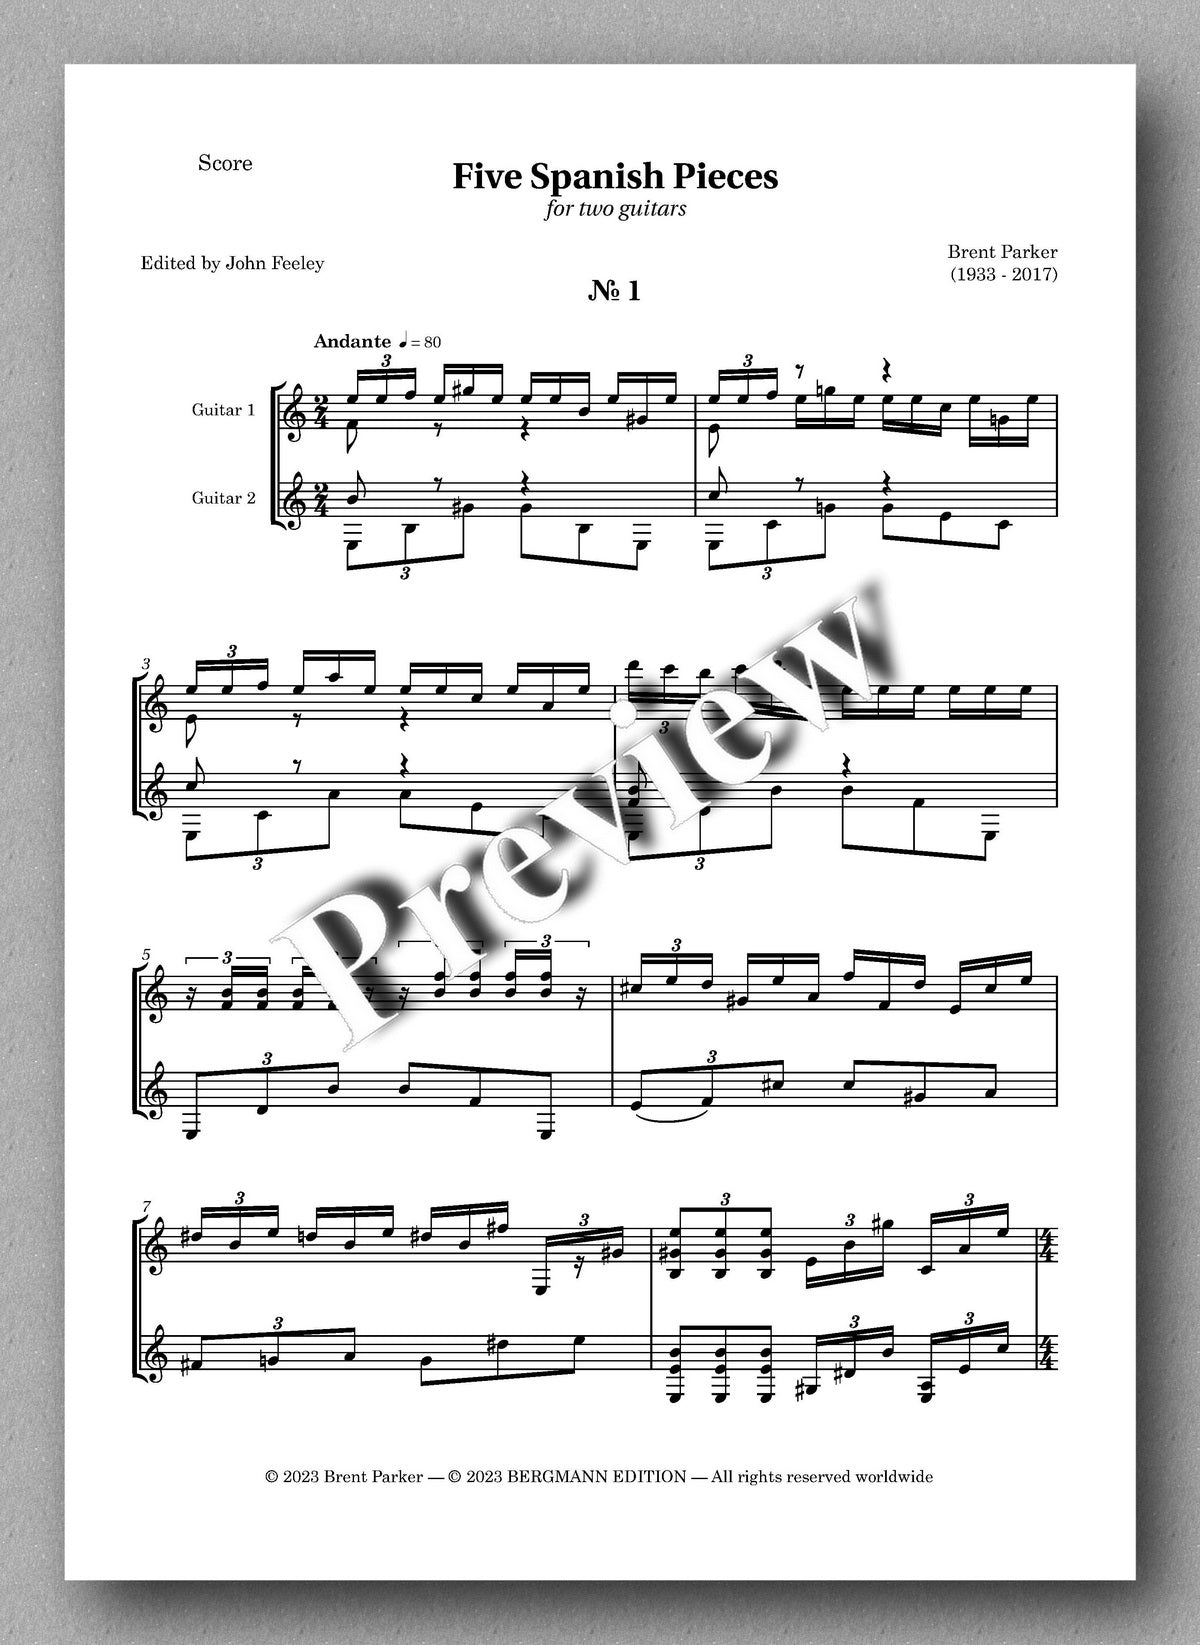 Five Spanish Pieces by Brent Parker - preview of the music score 1